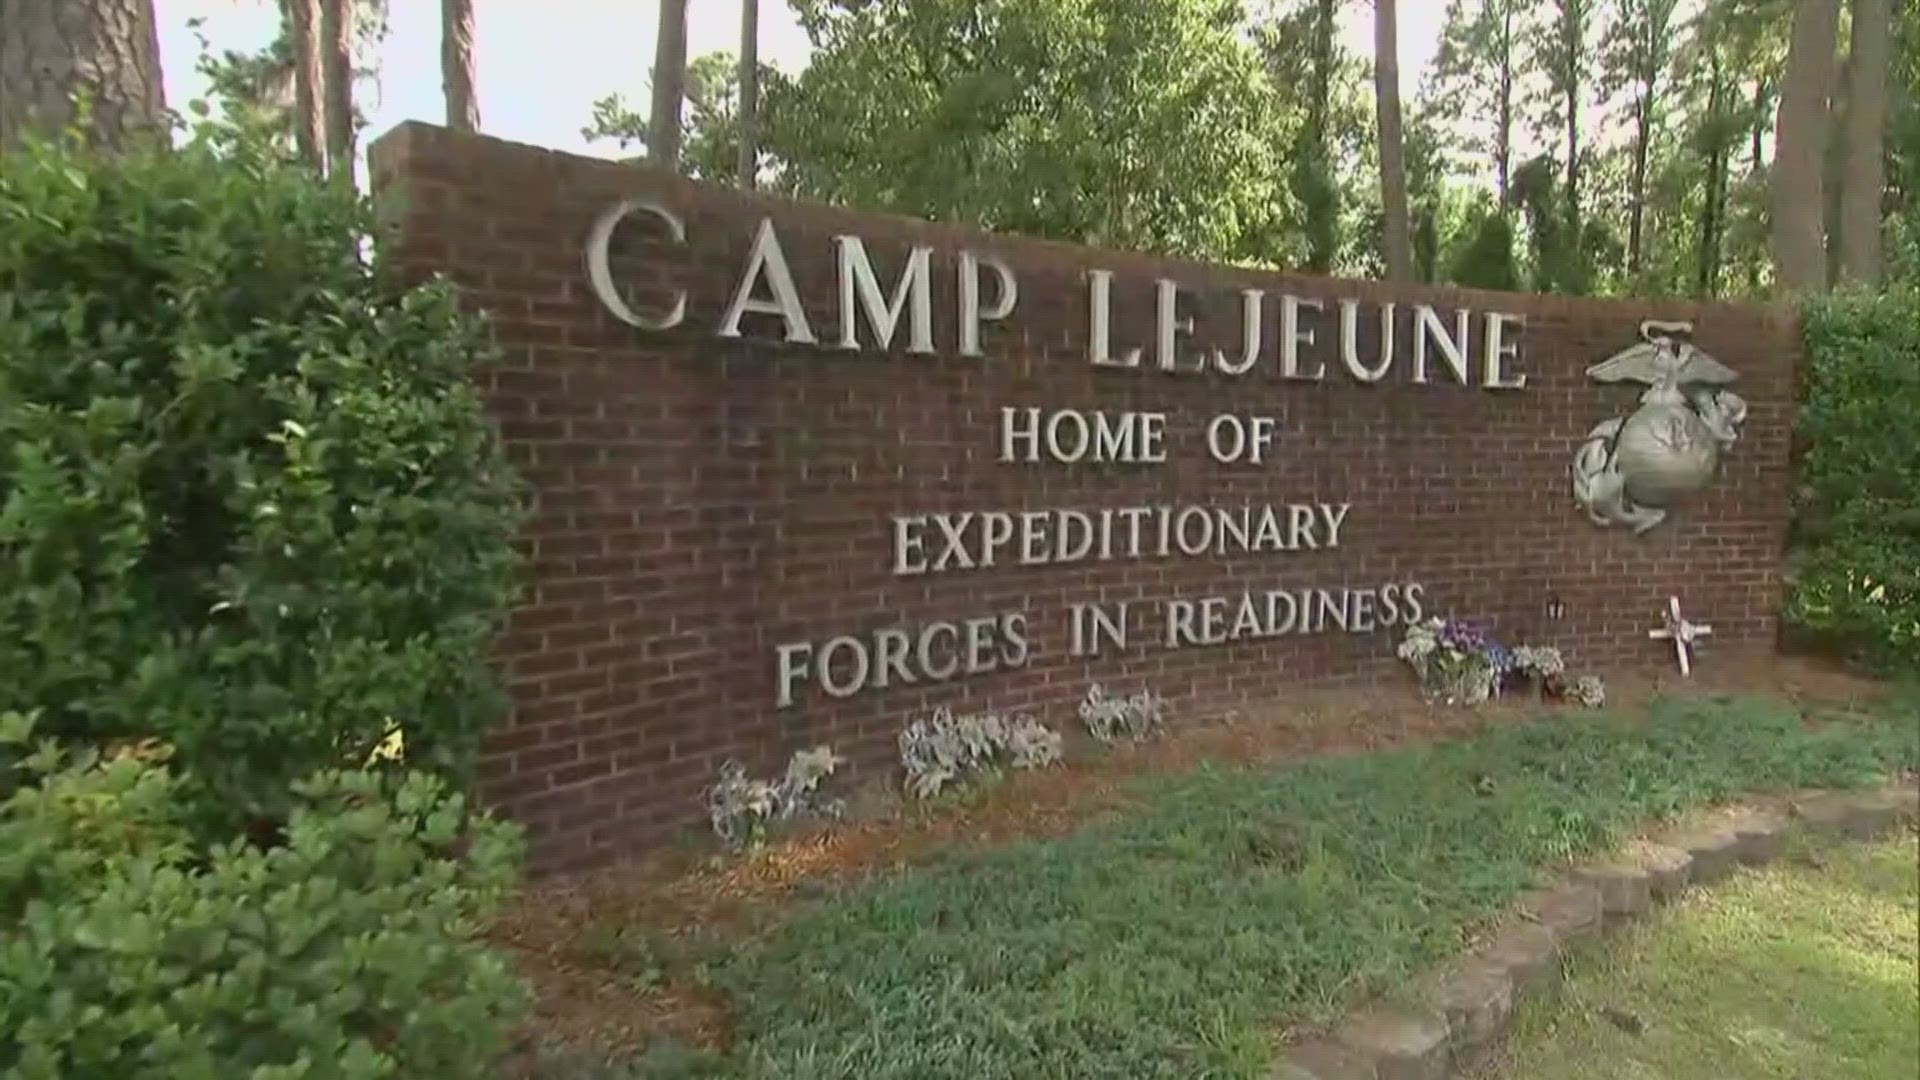 A Marine has been killed in a homicide at Camp Lejeune and a second Marine is being held on suspicion of being involved.